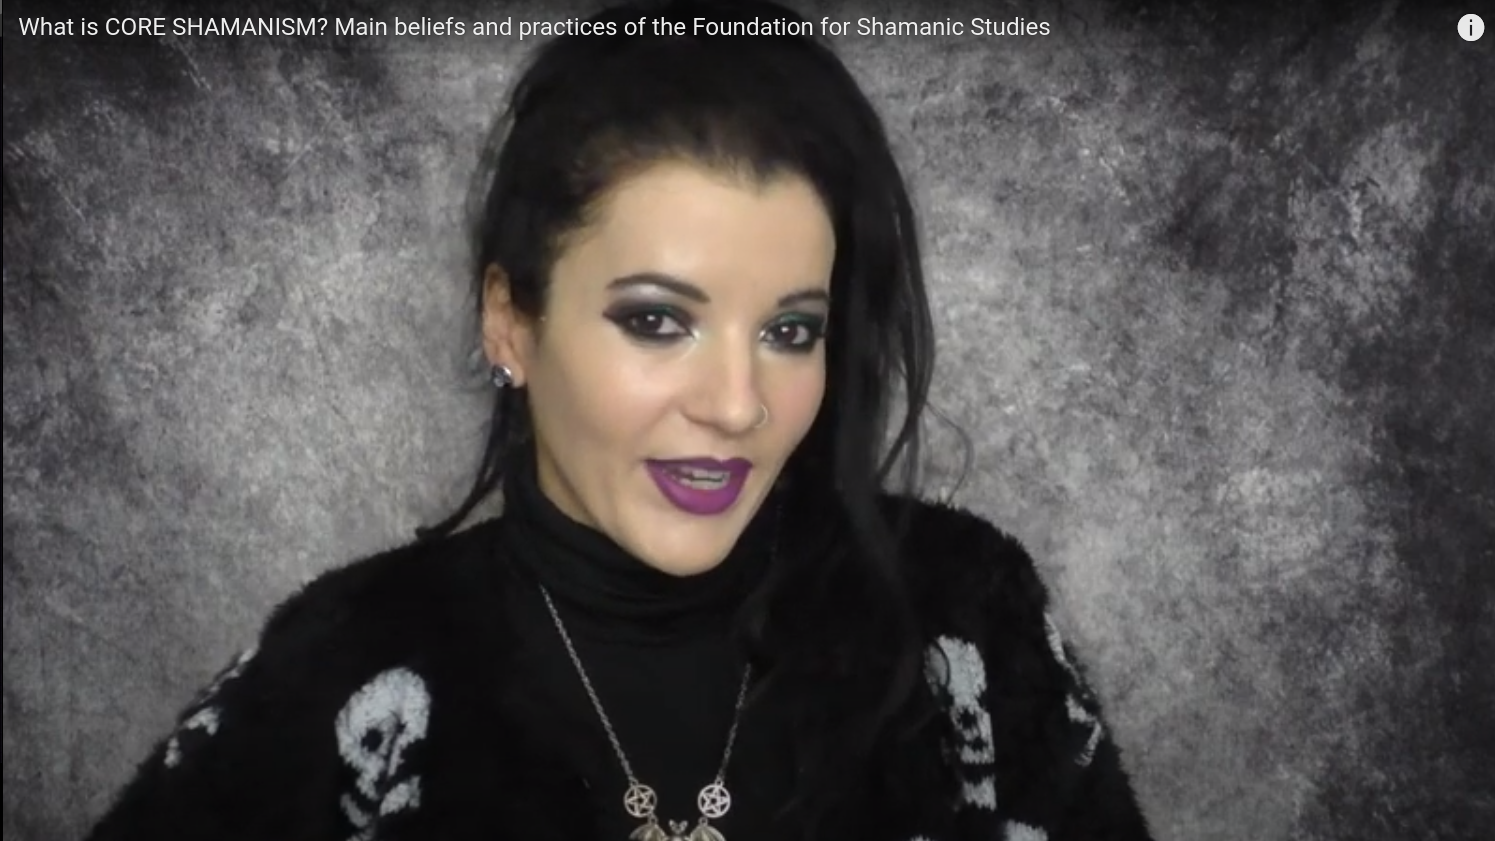 Angela wearing a black top with fuzzy skulls and a bat pendant